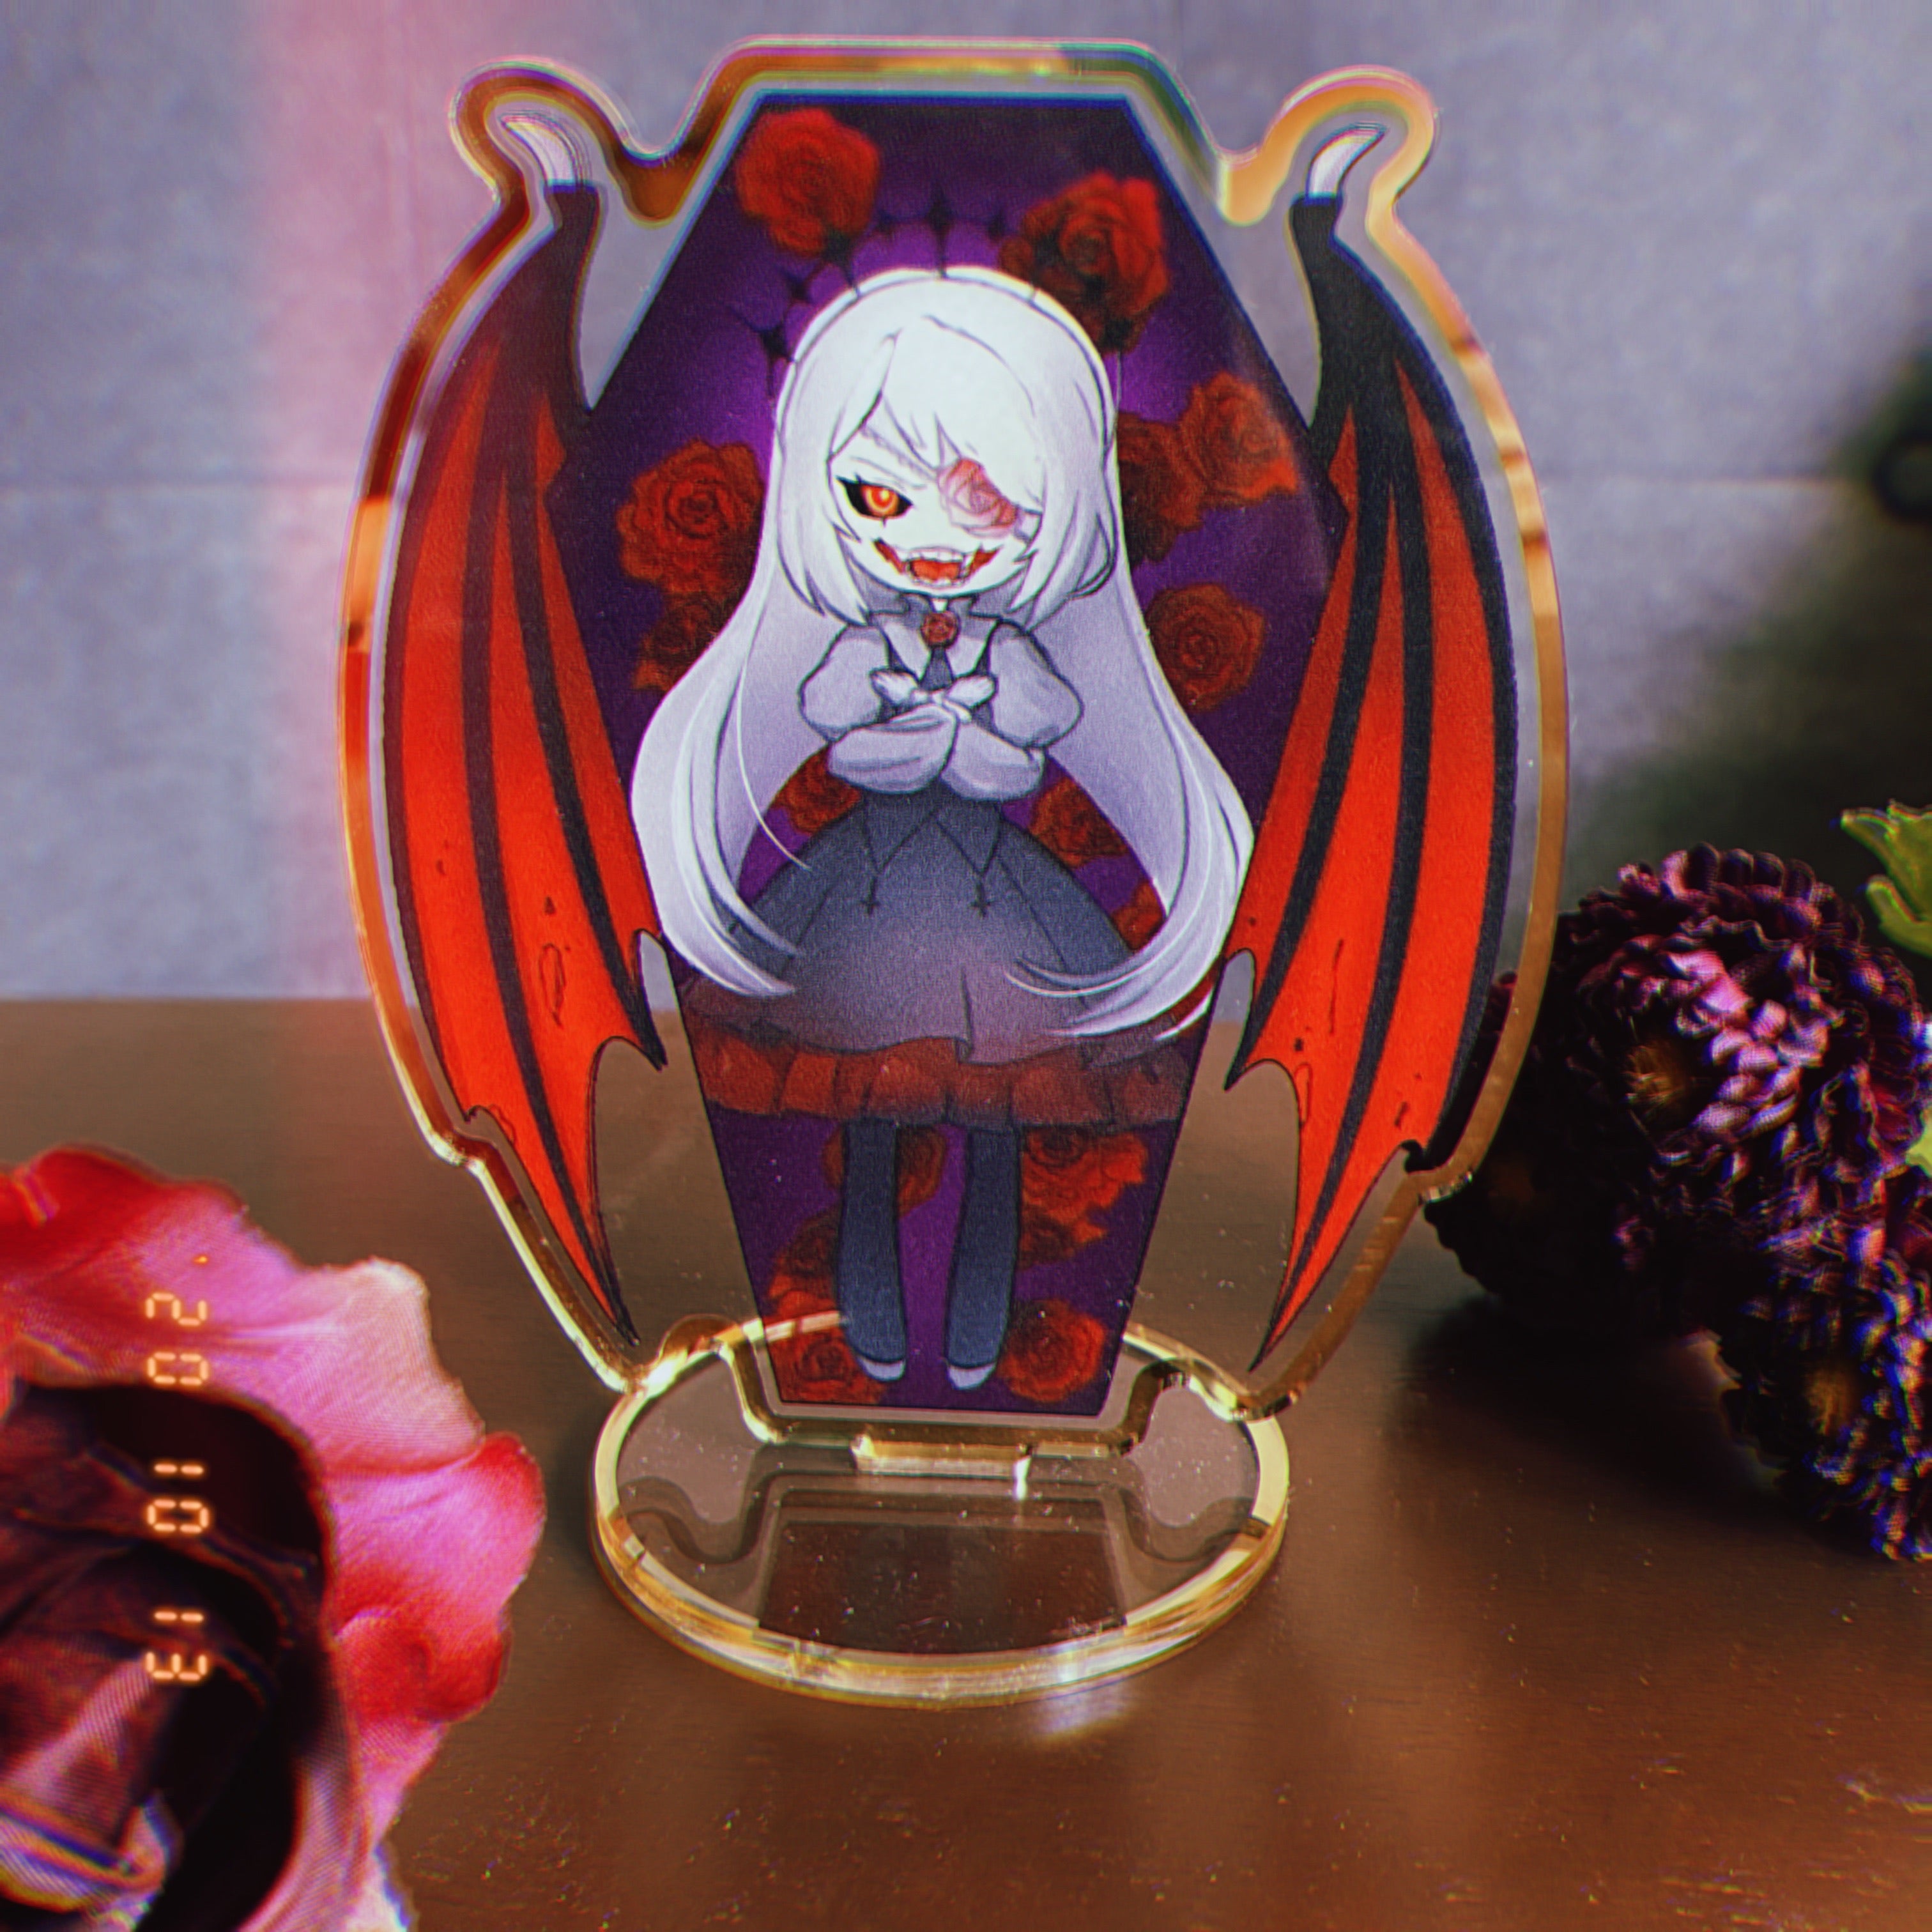 Ophelia the Vampire Queen 4.5inch Acrylic Stand